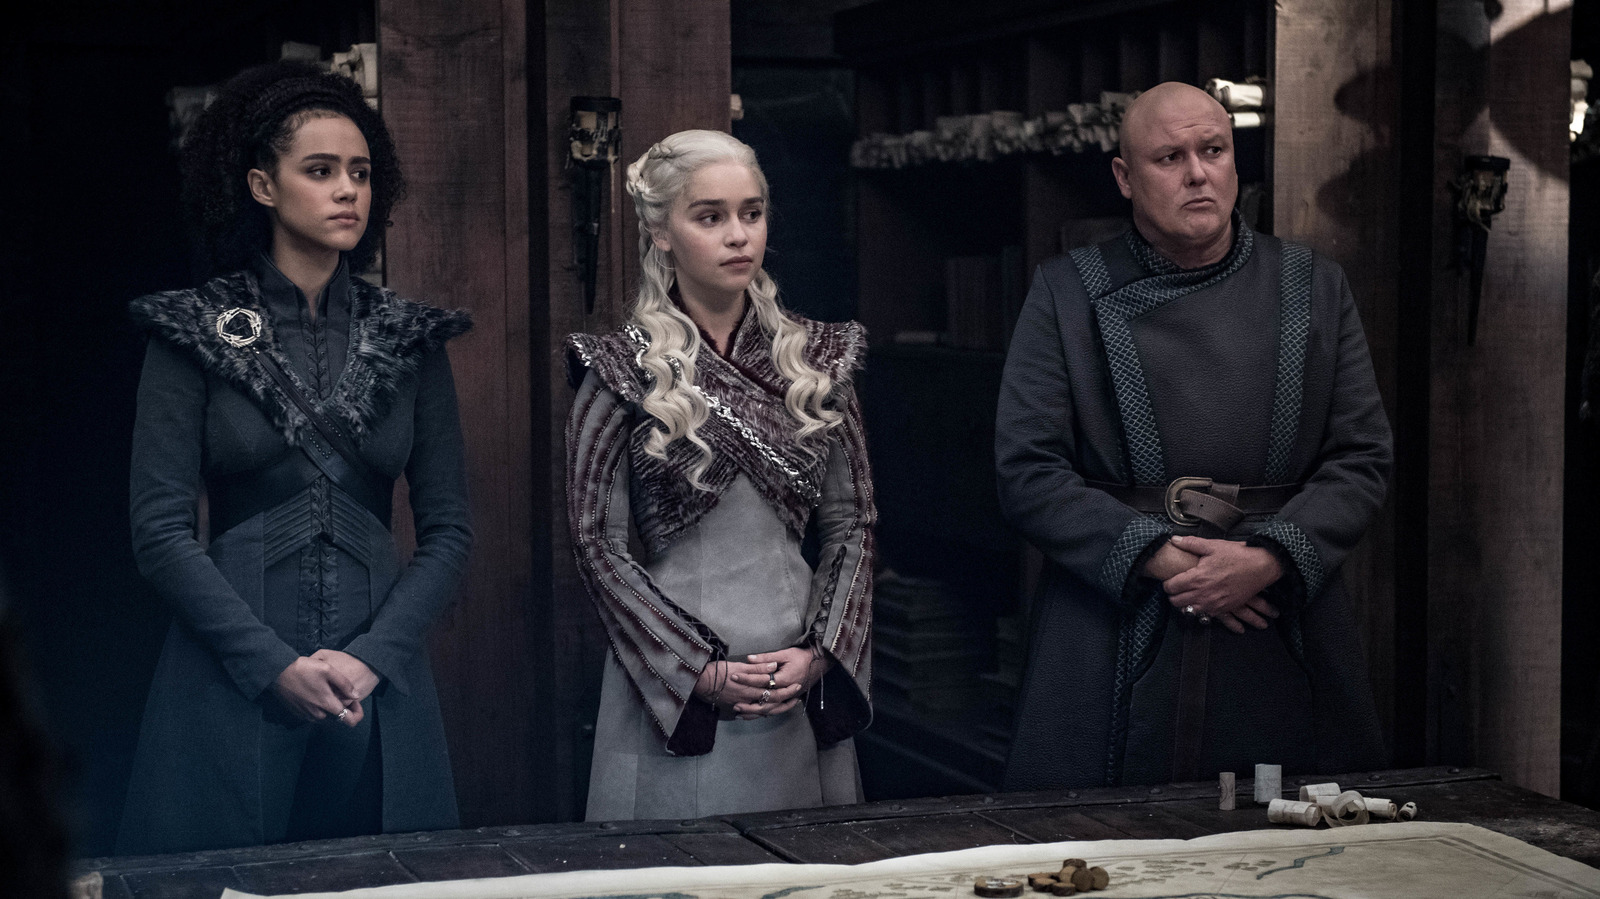 #Game Of Thrones Author George R.R. Martin Was Left Out Of The Loop During The Later Seasons